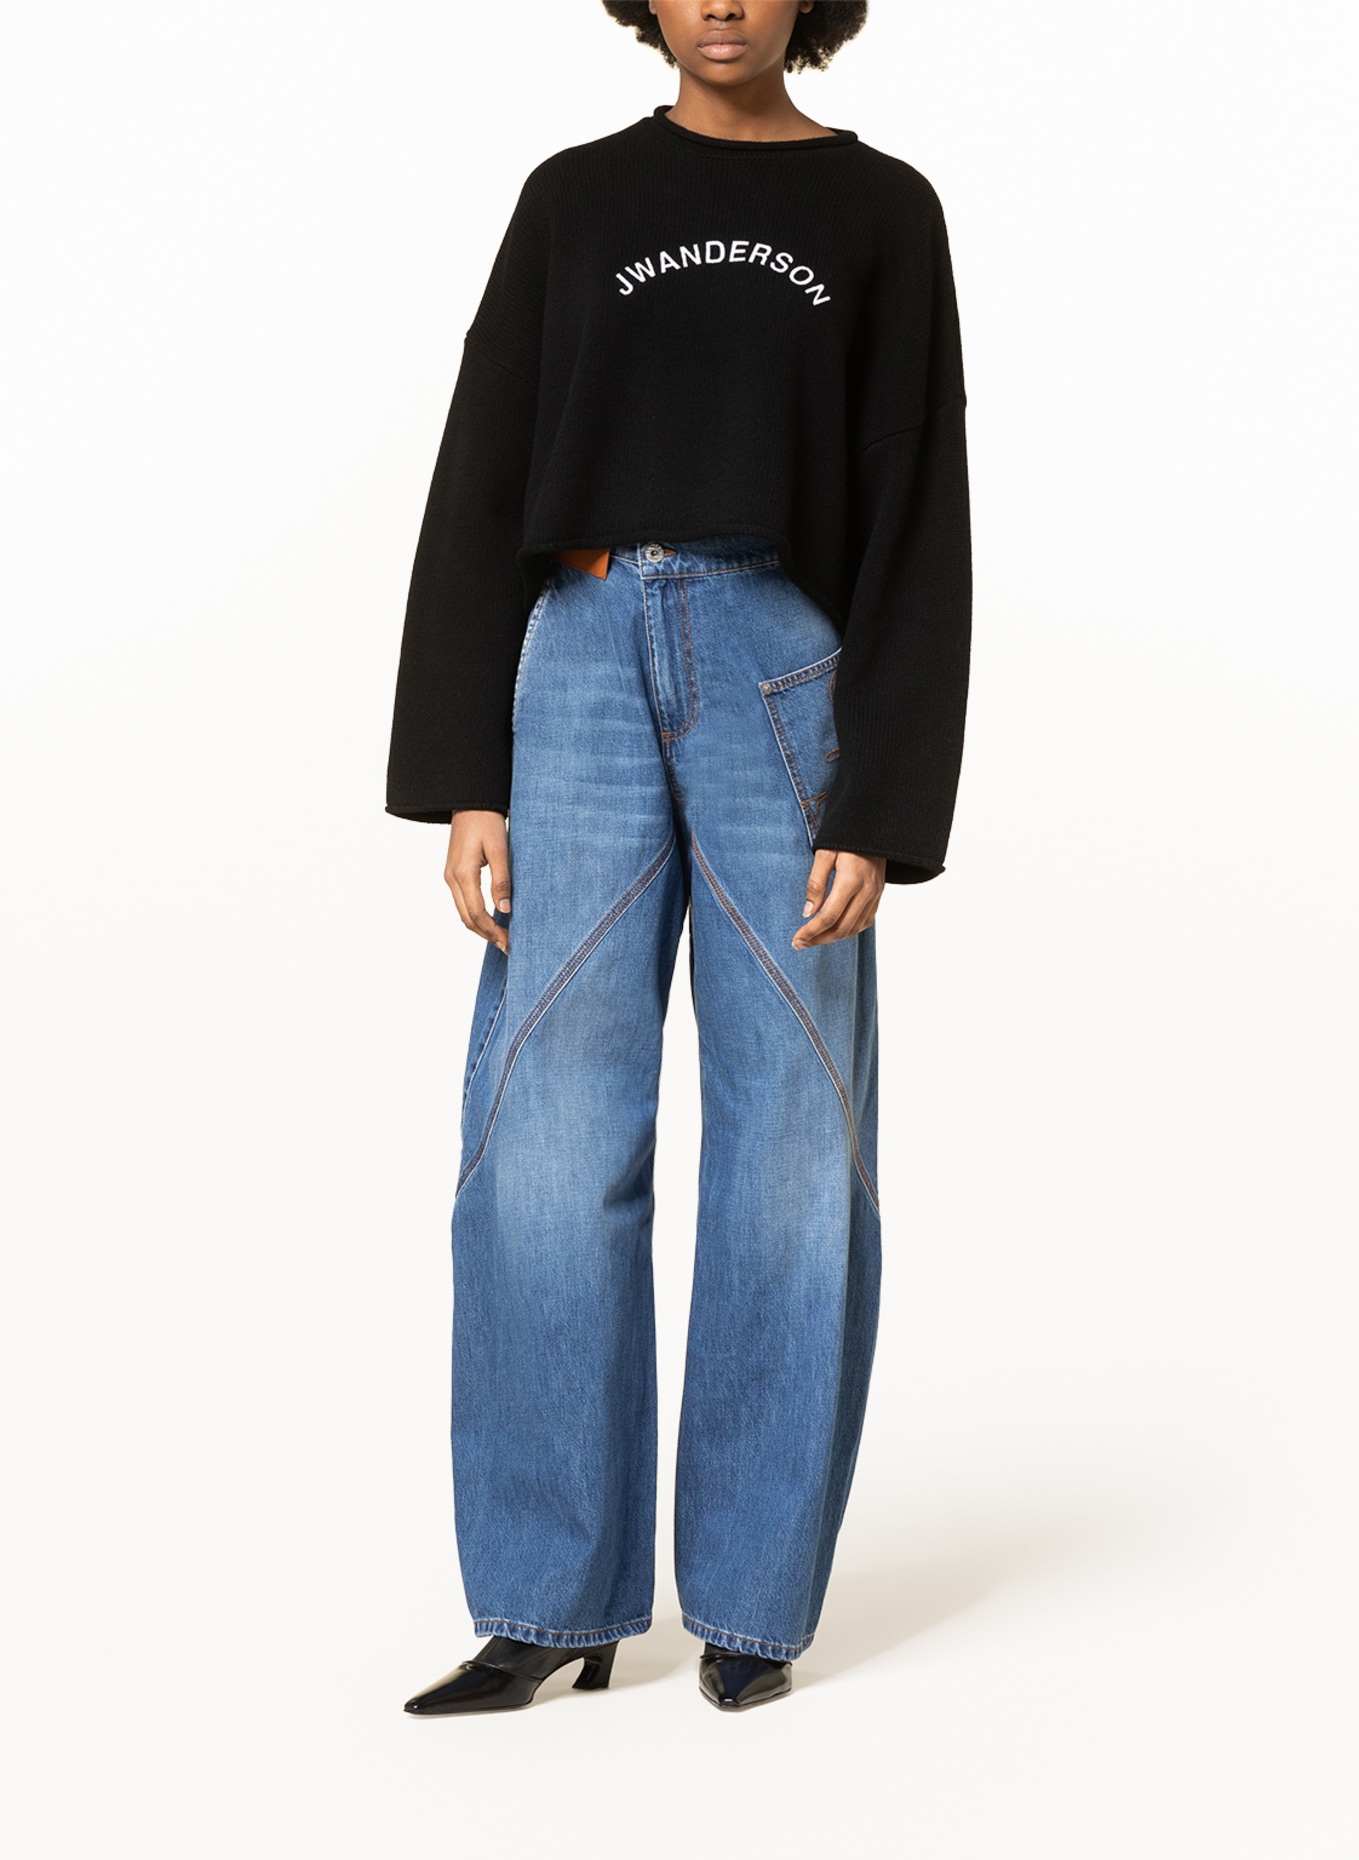 JW ANDERSON Cropped sweater, Color: BLACK (Image 2)